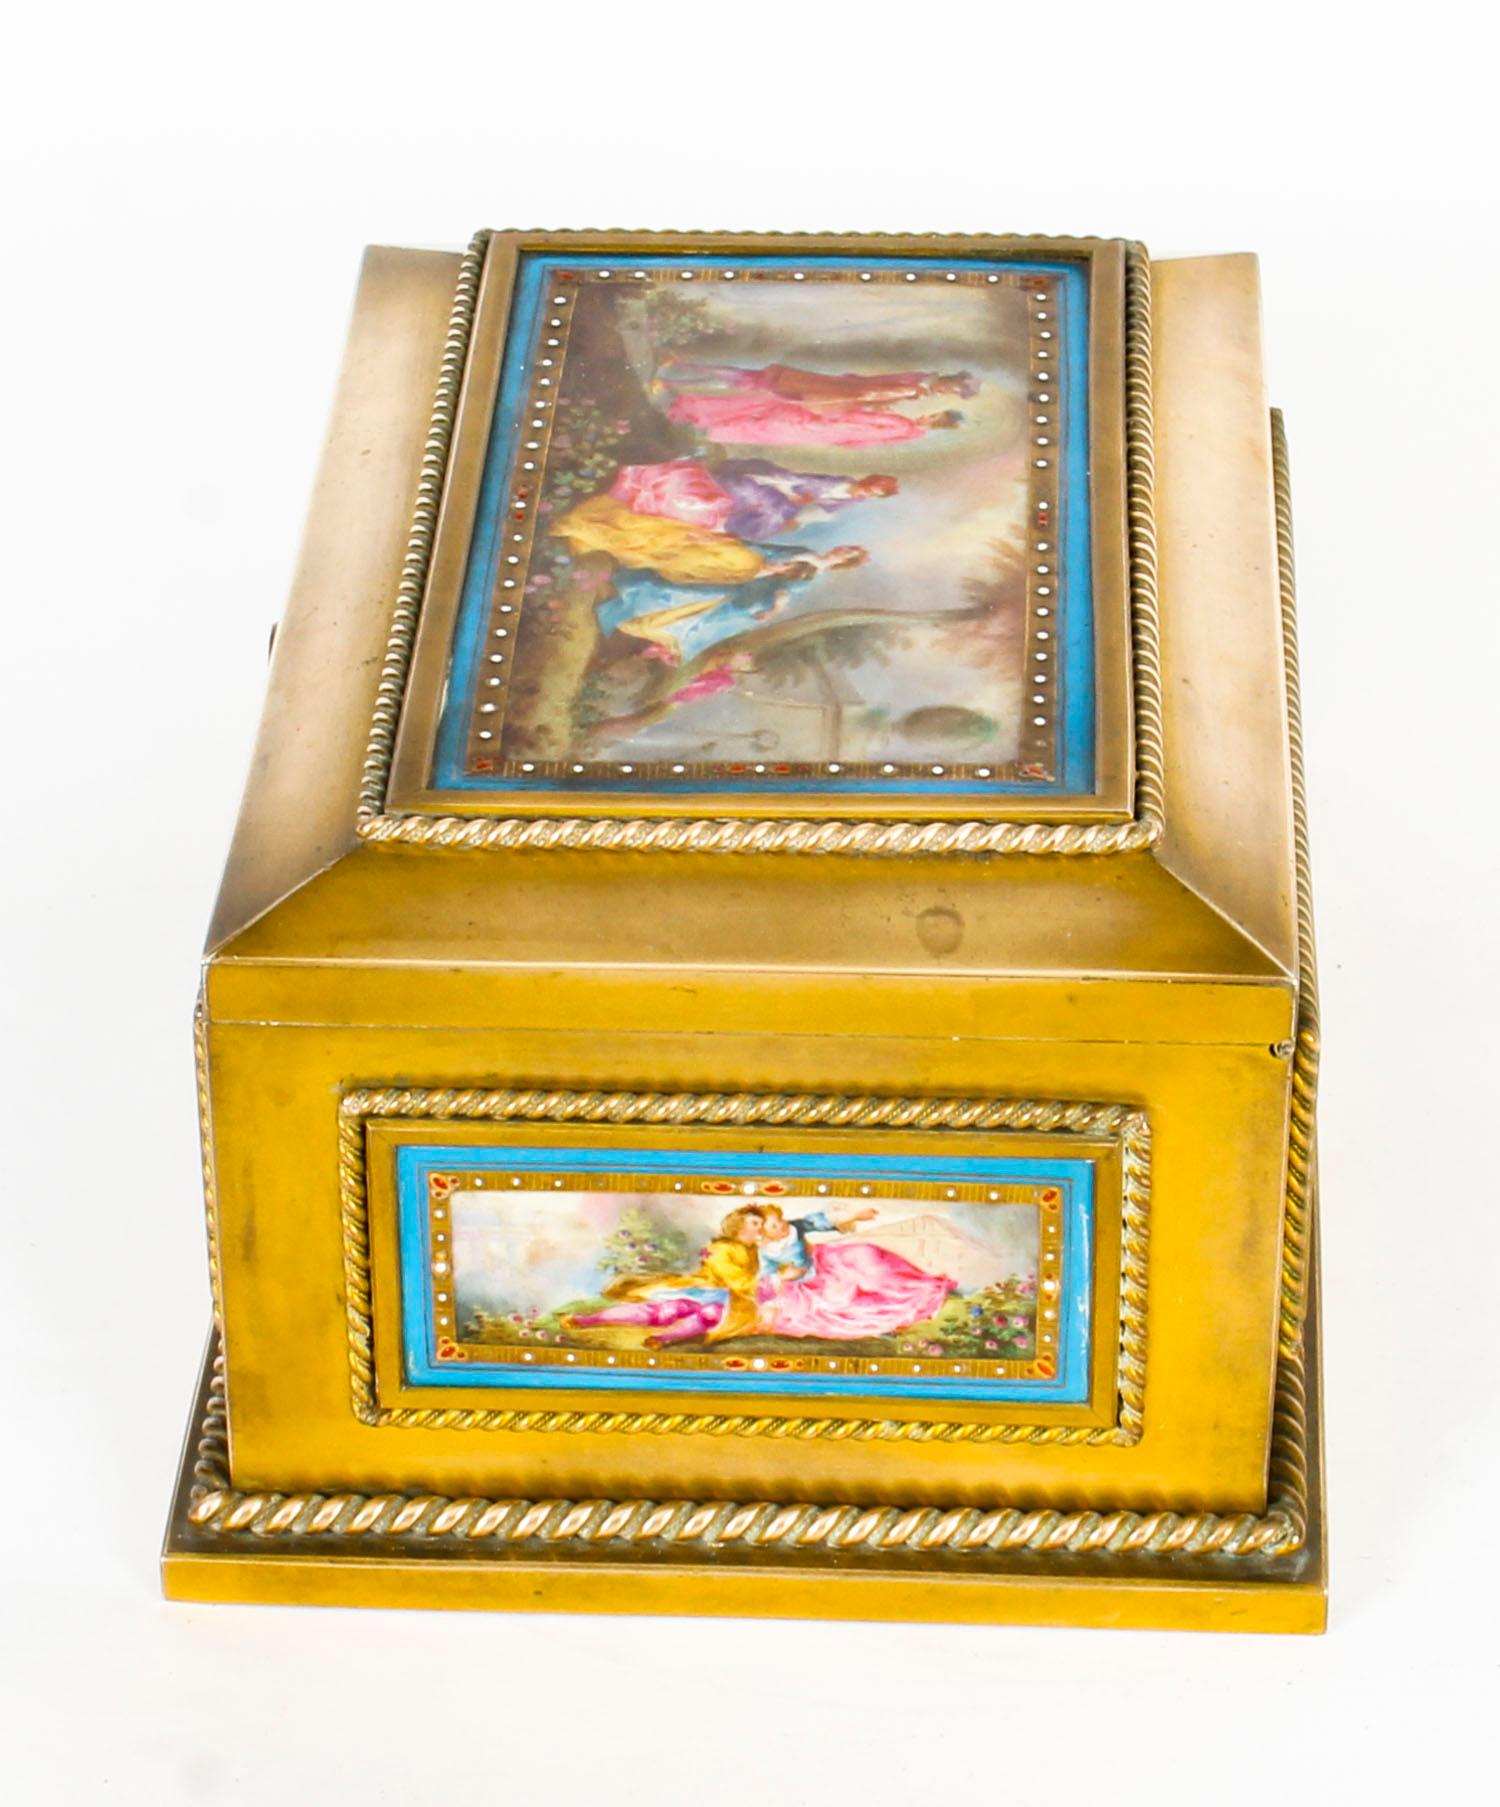 Antique French Ormolu and Sèvres Porcelain Jewelry Casket, 19th Century 7